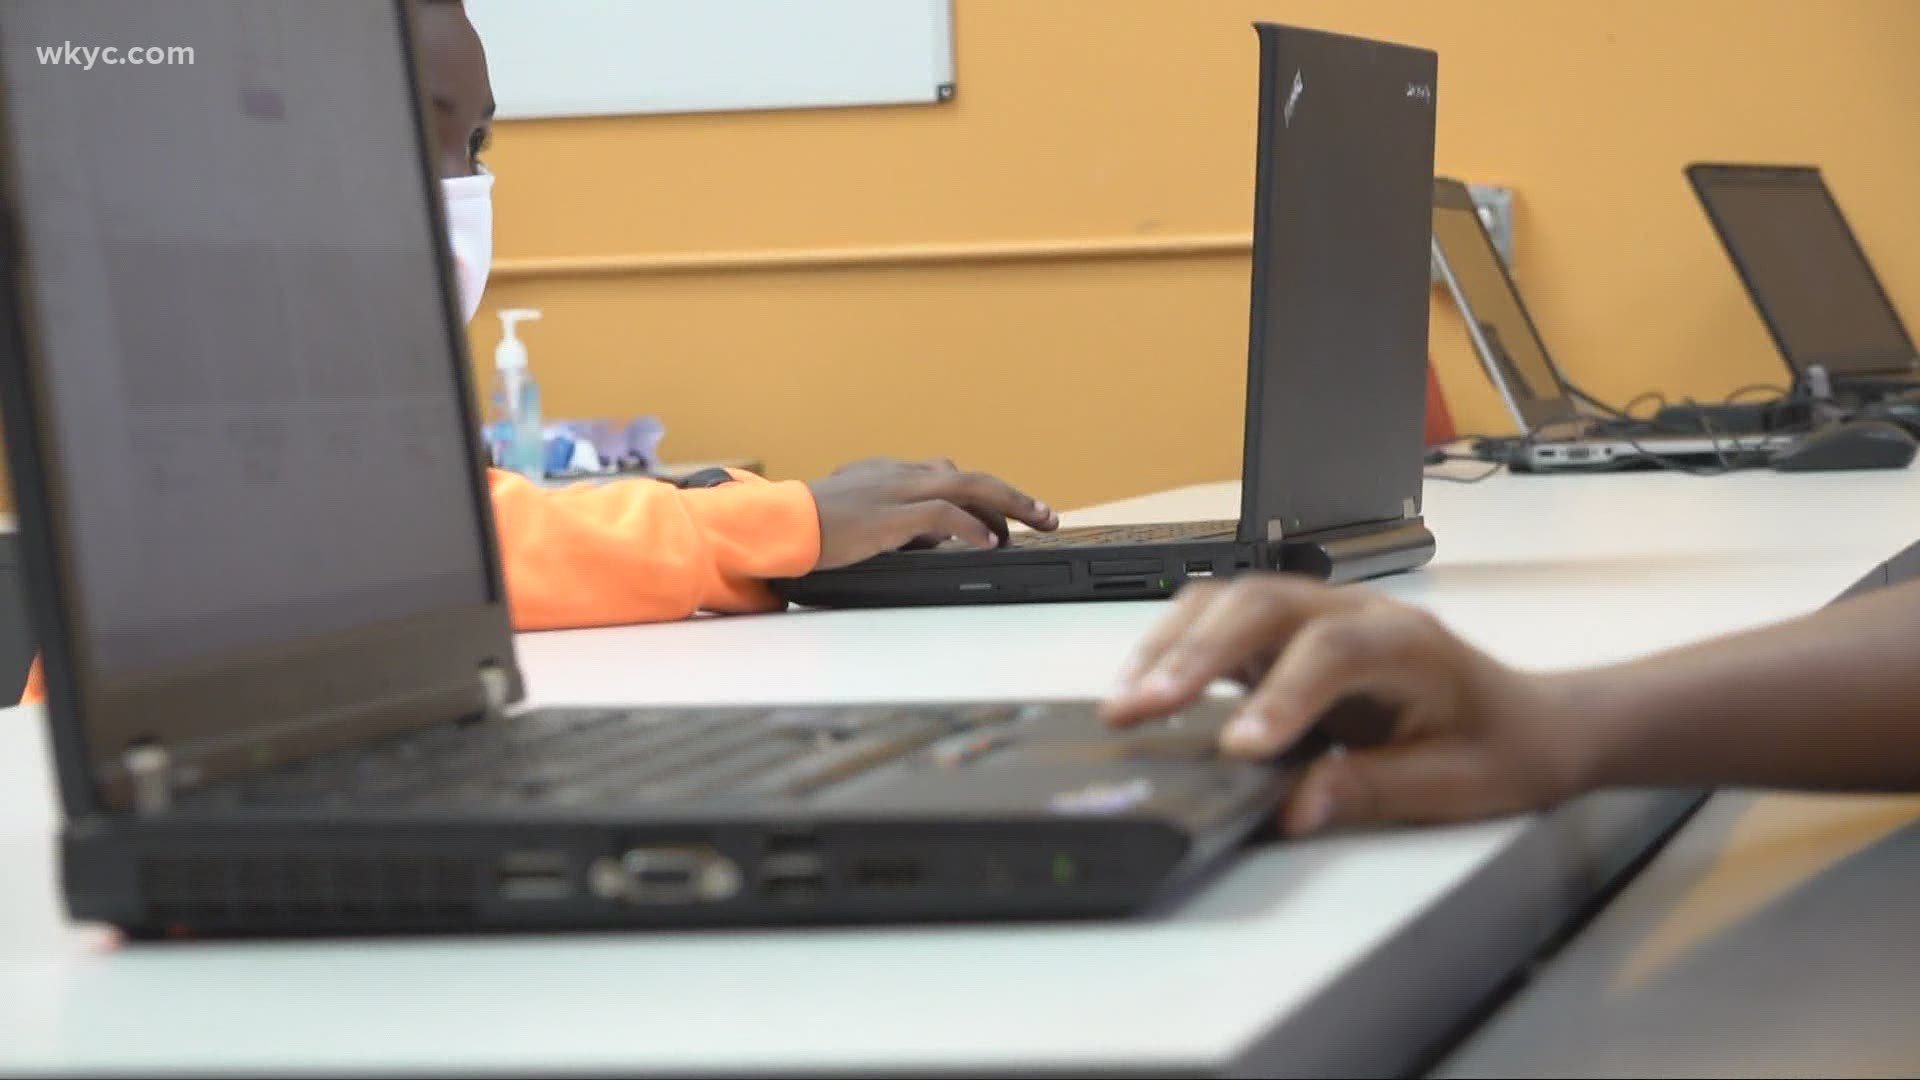 The organization is opening in-person learning centers in clubs across the region. The goal is to assist children as they navigate remote learning.